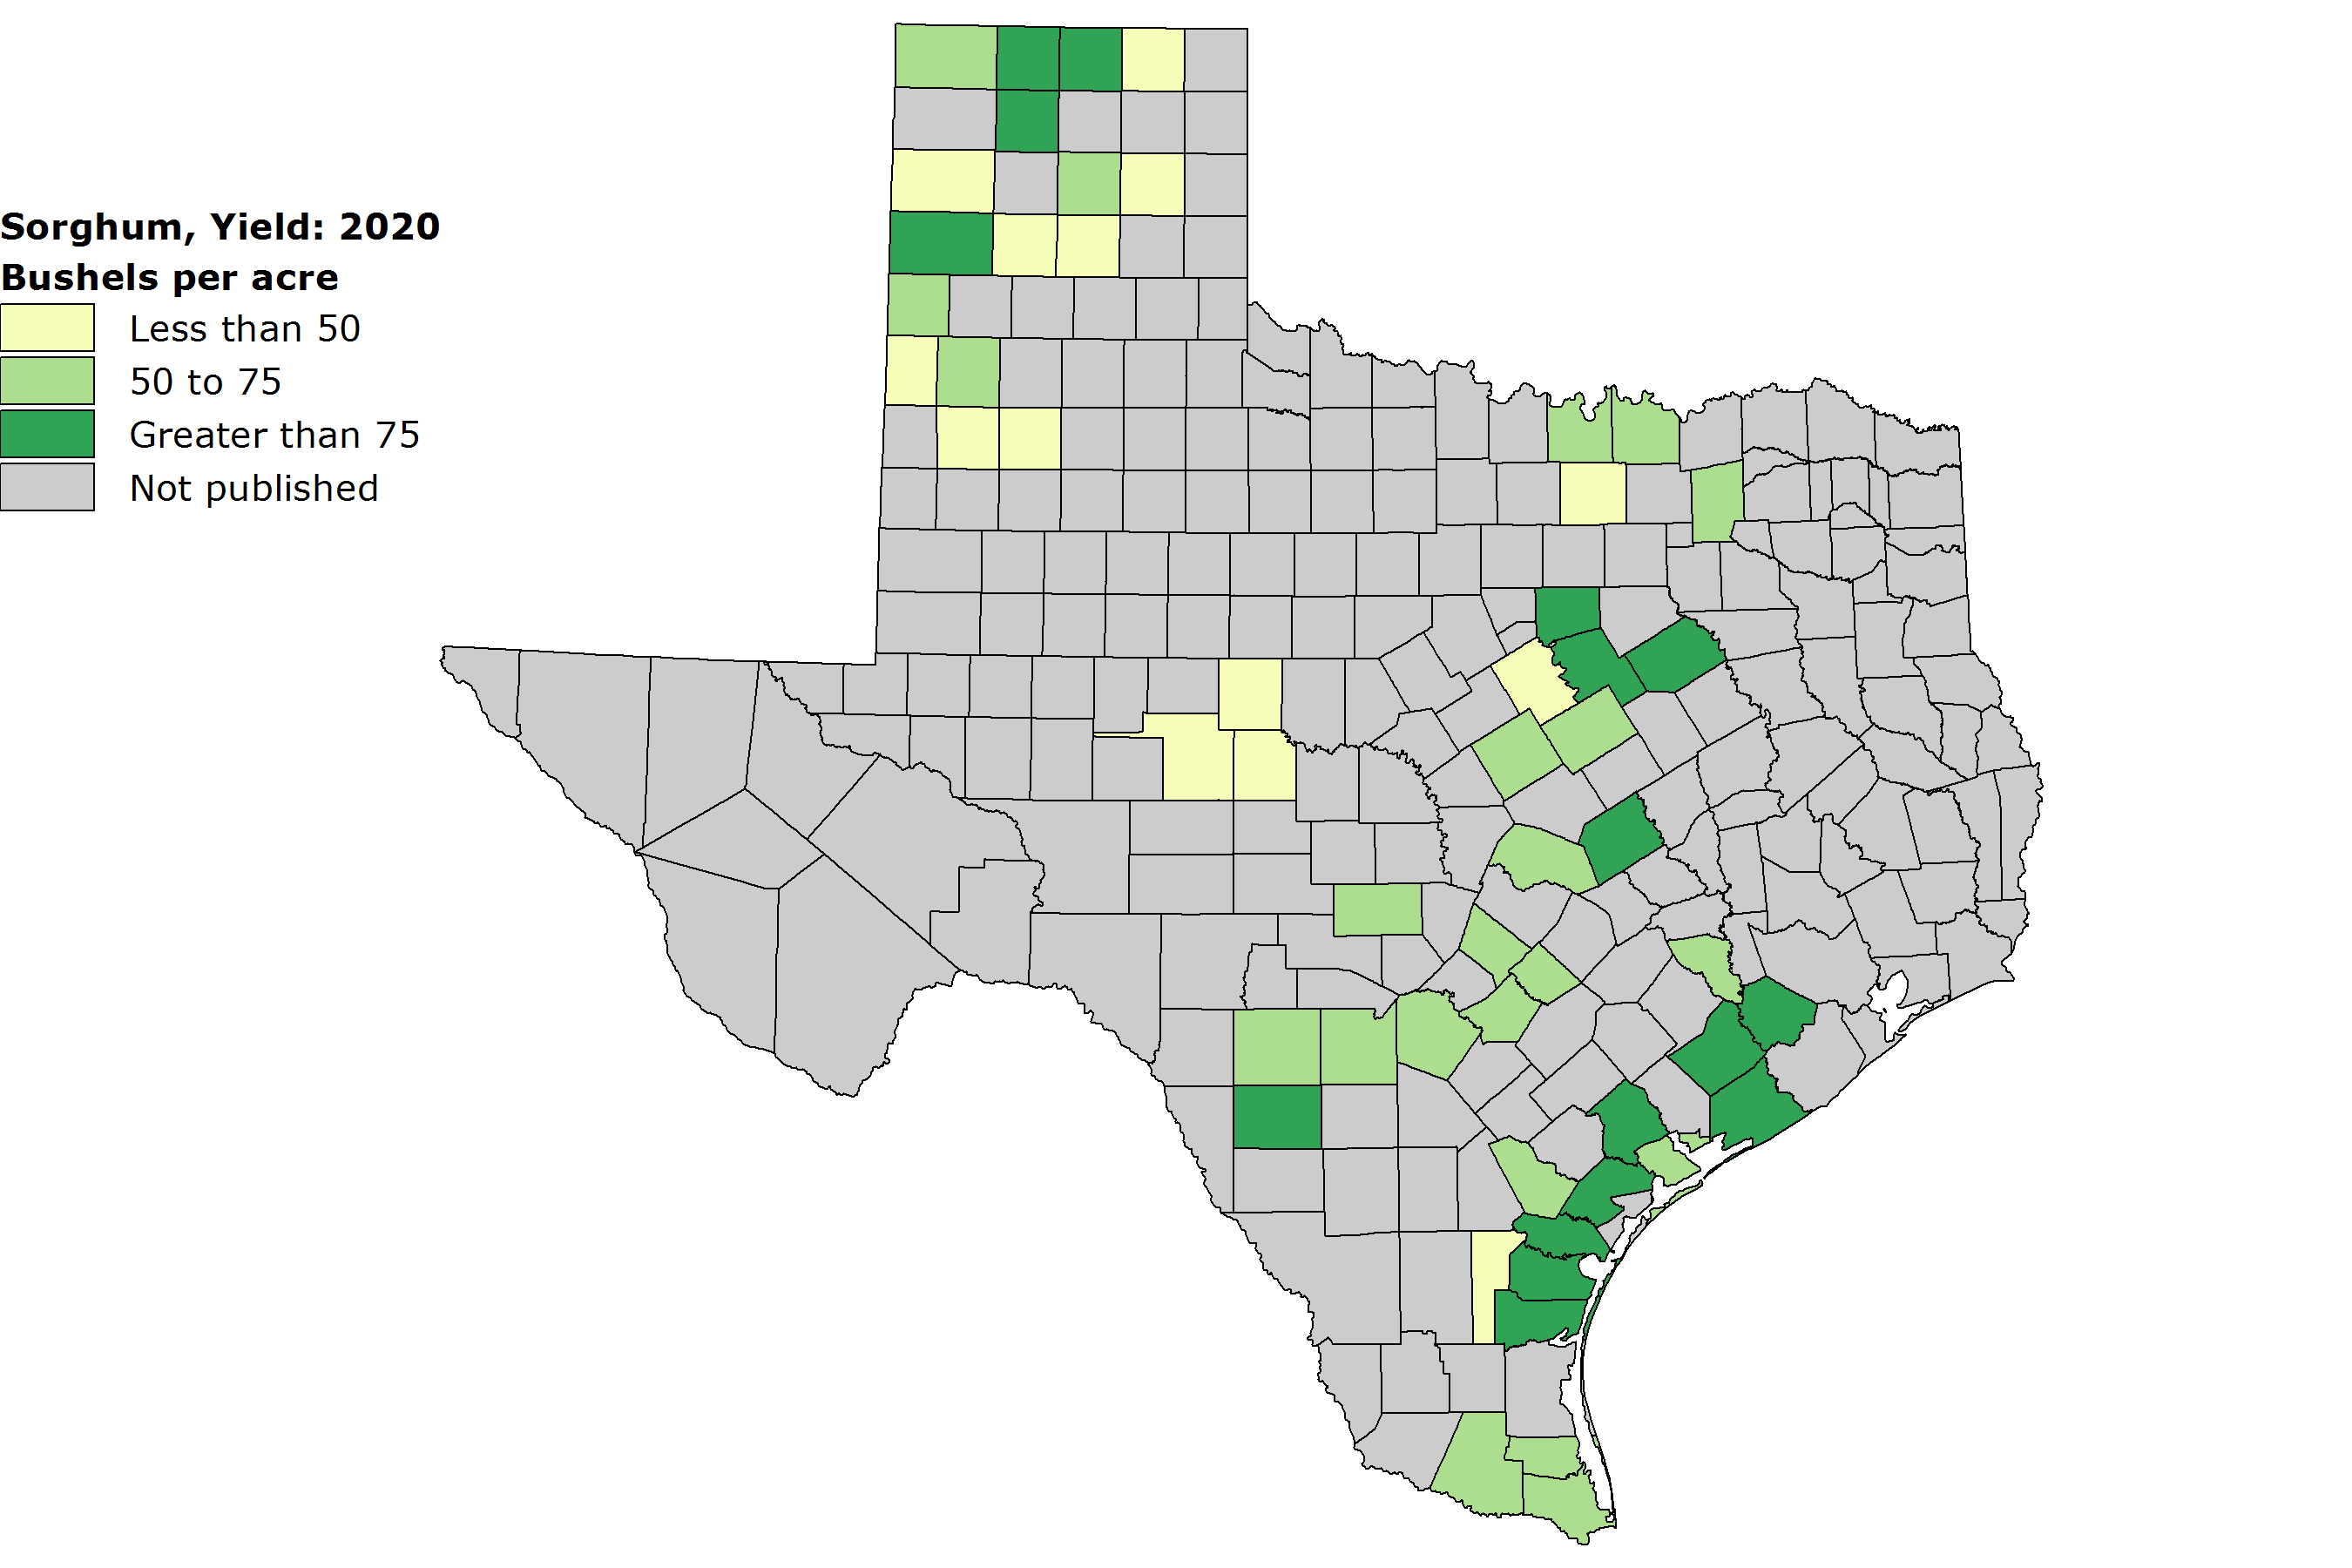 A shaded map of Texas showing the average yield of sorghum bushels per acre by county.